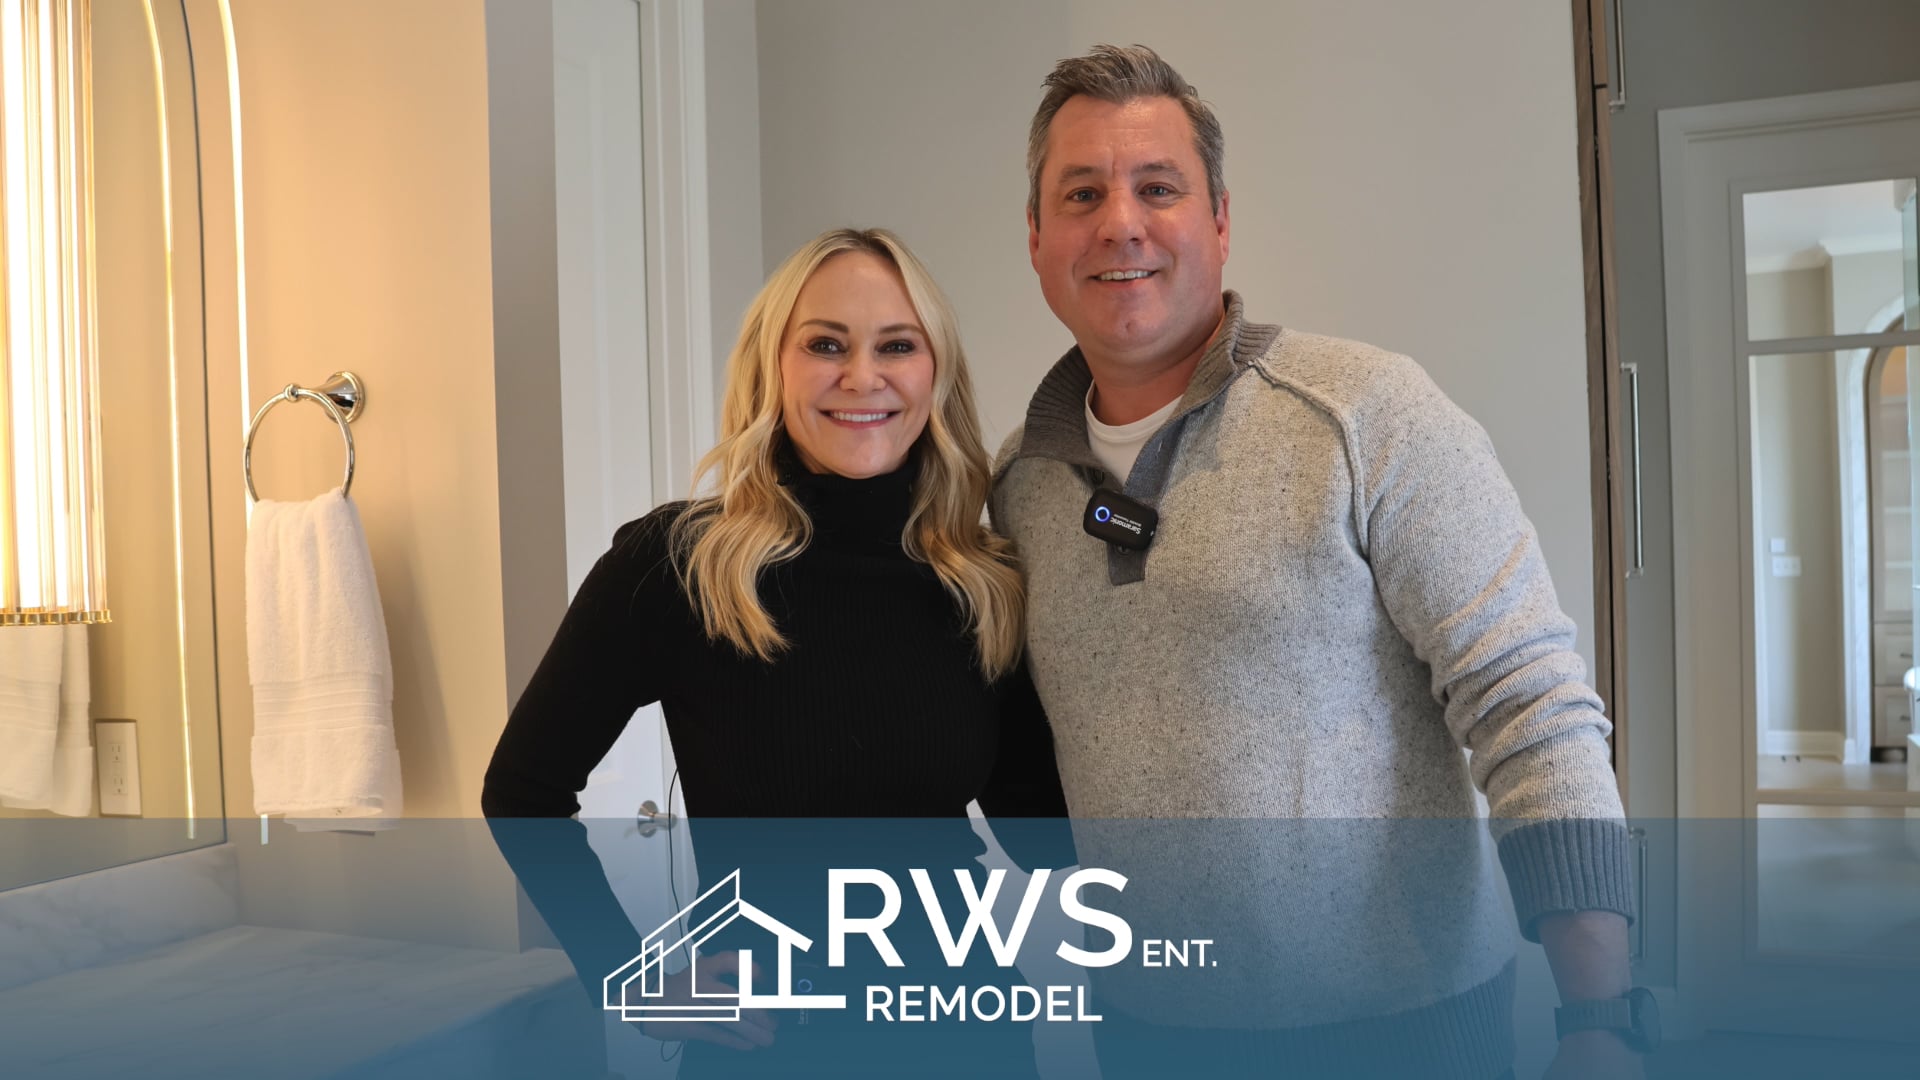 RWS Remodel - Luxury Kitchen, Bath, and Whole Home Renovations in the Kansas City area